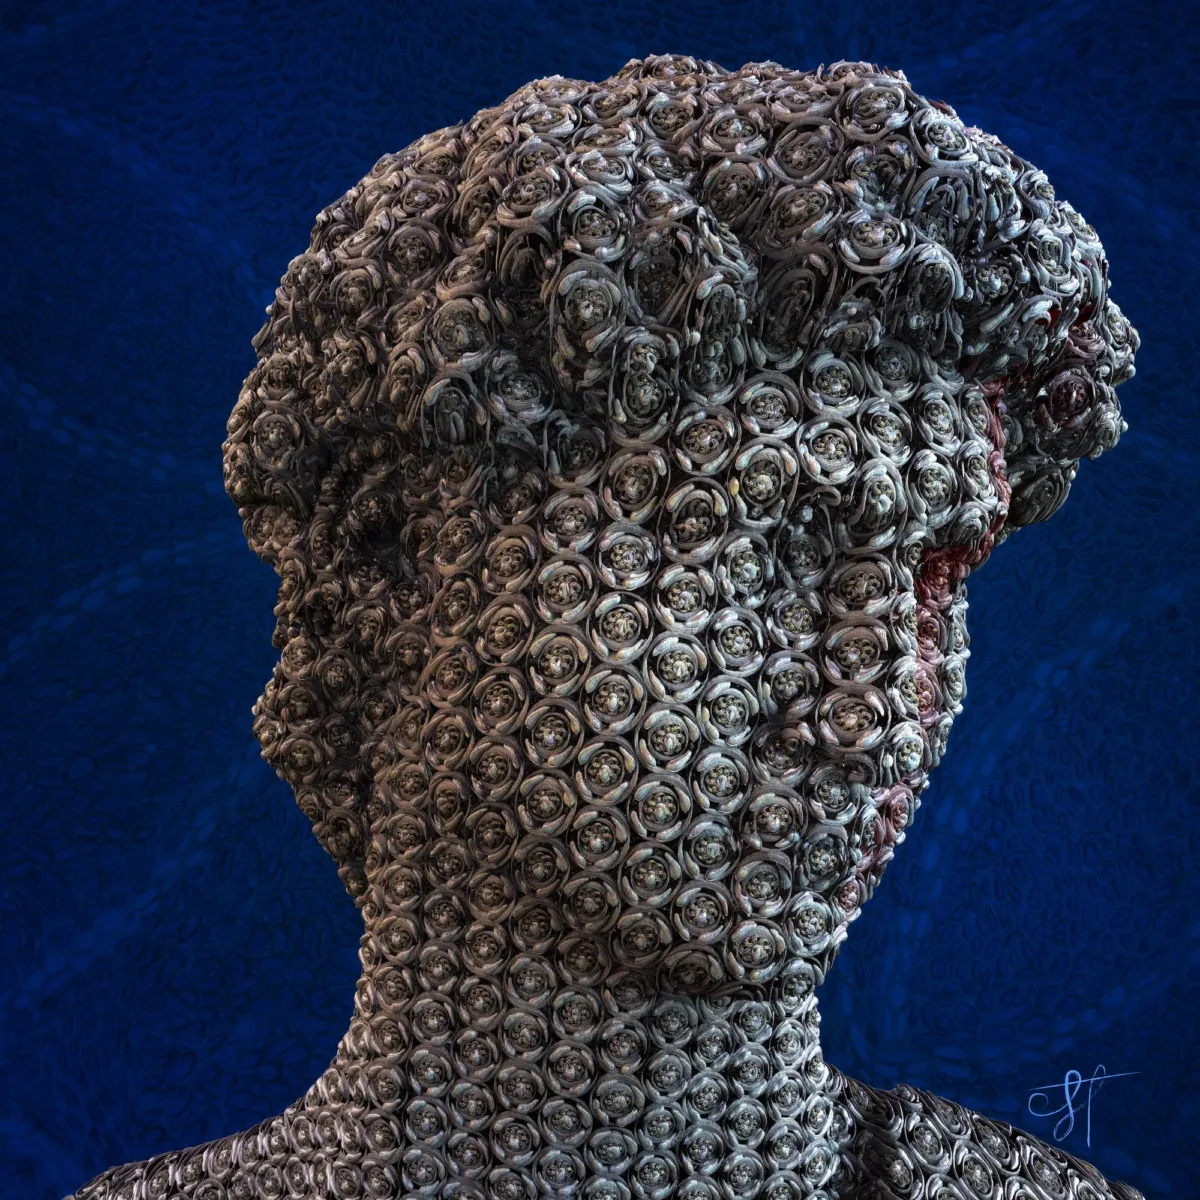 Print from contemporary artist Gabriel Halo - David#20 for sell. “David” is recognized as the standard of male beauty of the Renaissance and one of the most significant masterpieces of world art. And now a modern embodiment of the ideal in digital format is presented to your attention. This version of the metamorphosis is made from circles of fractal patterns.